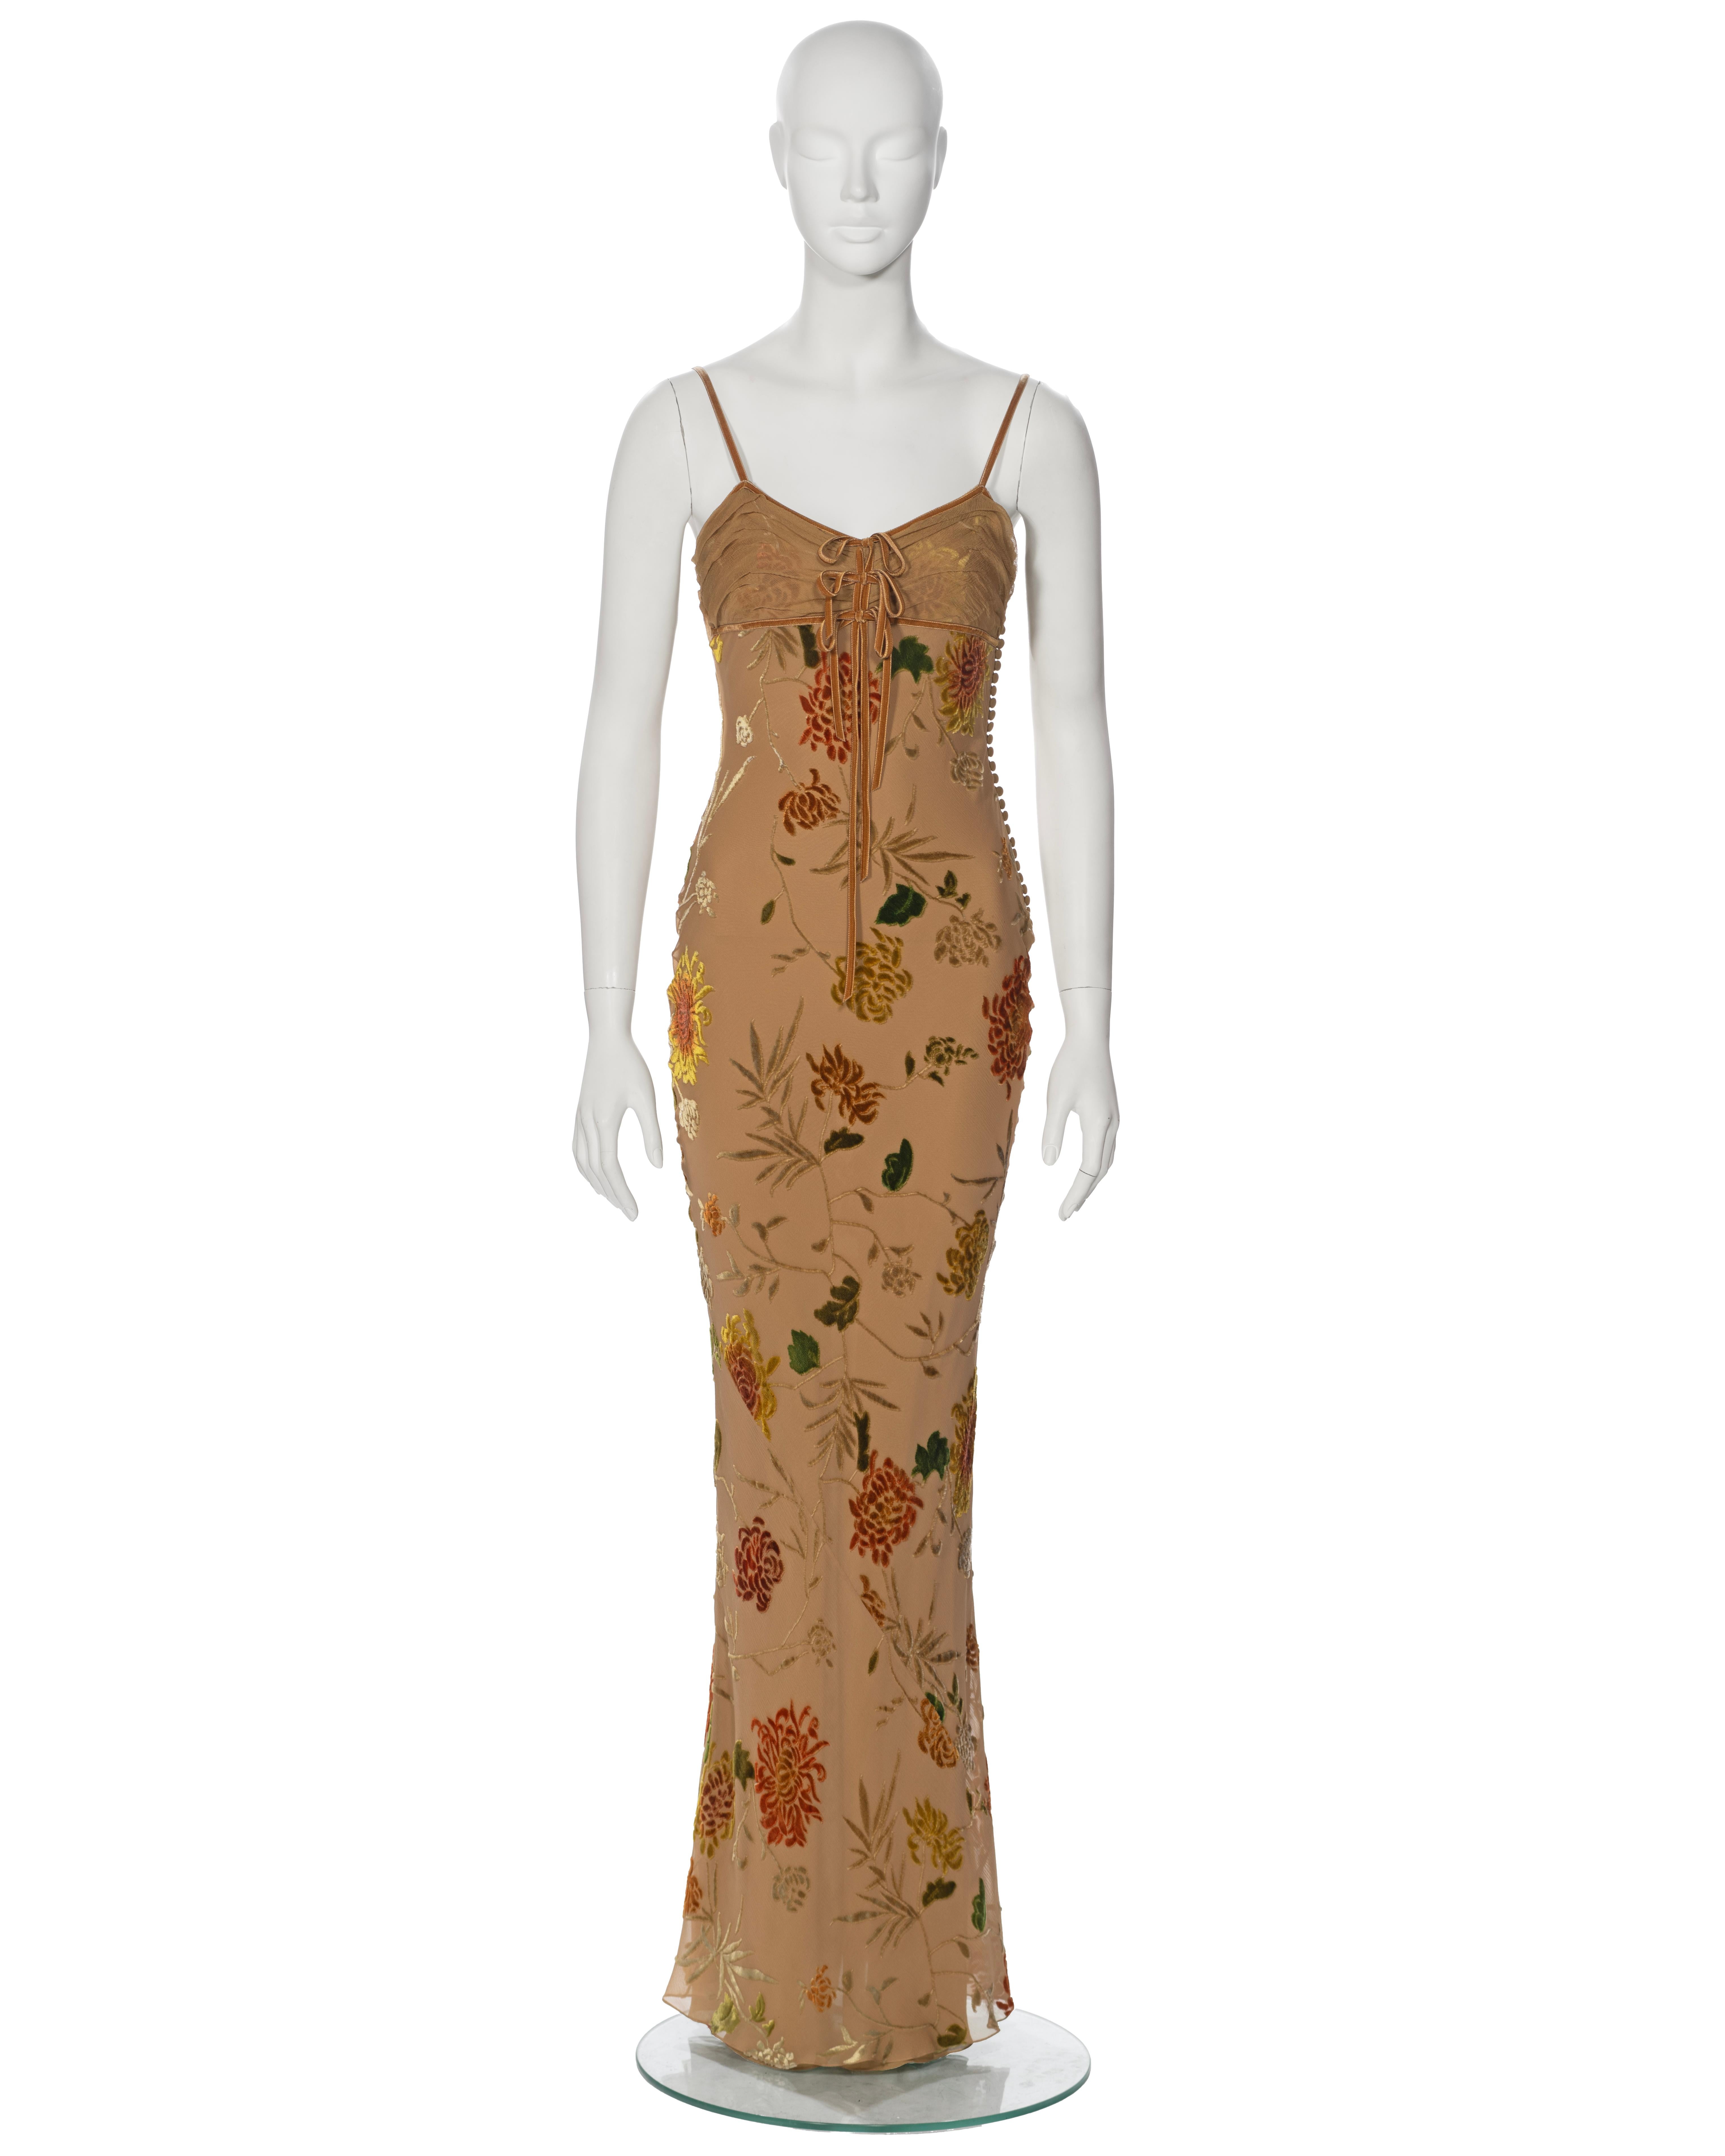 ▪ Archival Christian Dior Maxi Dress
▪ Creative Director: John Galliano
▪ Spring-Summer 2006
▪ Sold by One of a Kind Archive
▪ Elegantly crafted from tan velvet devoré, this dress showcases a captivating floral motif in a palette of green, yellow,